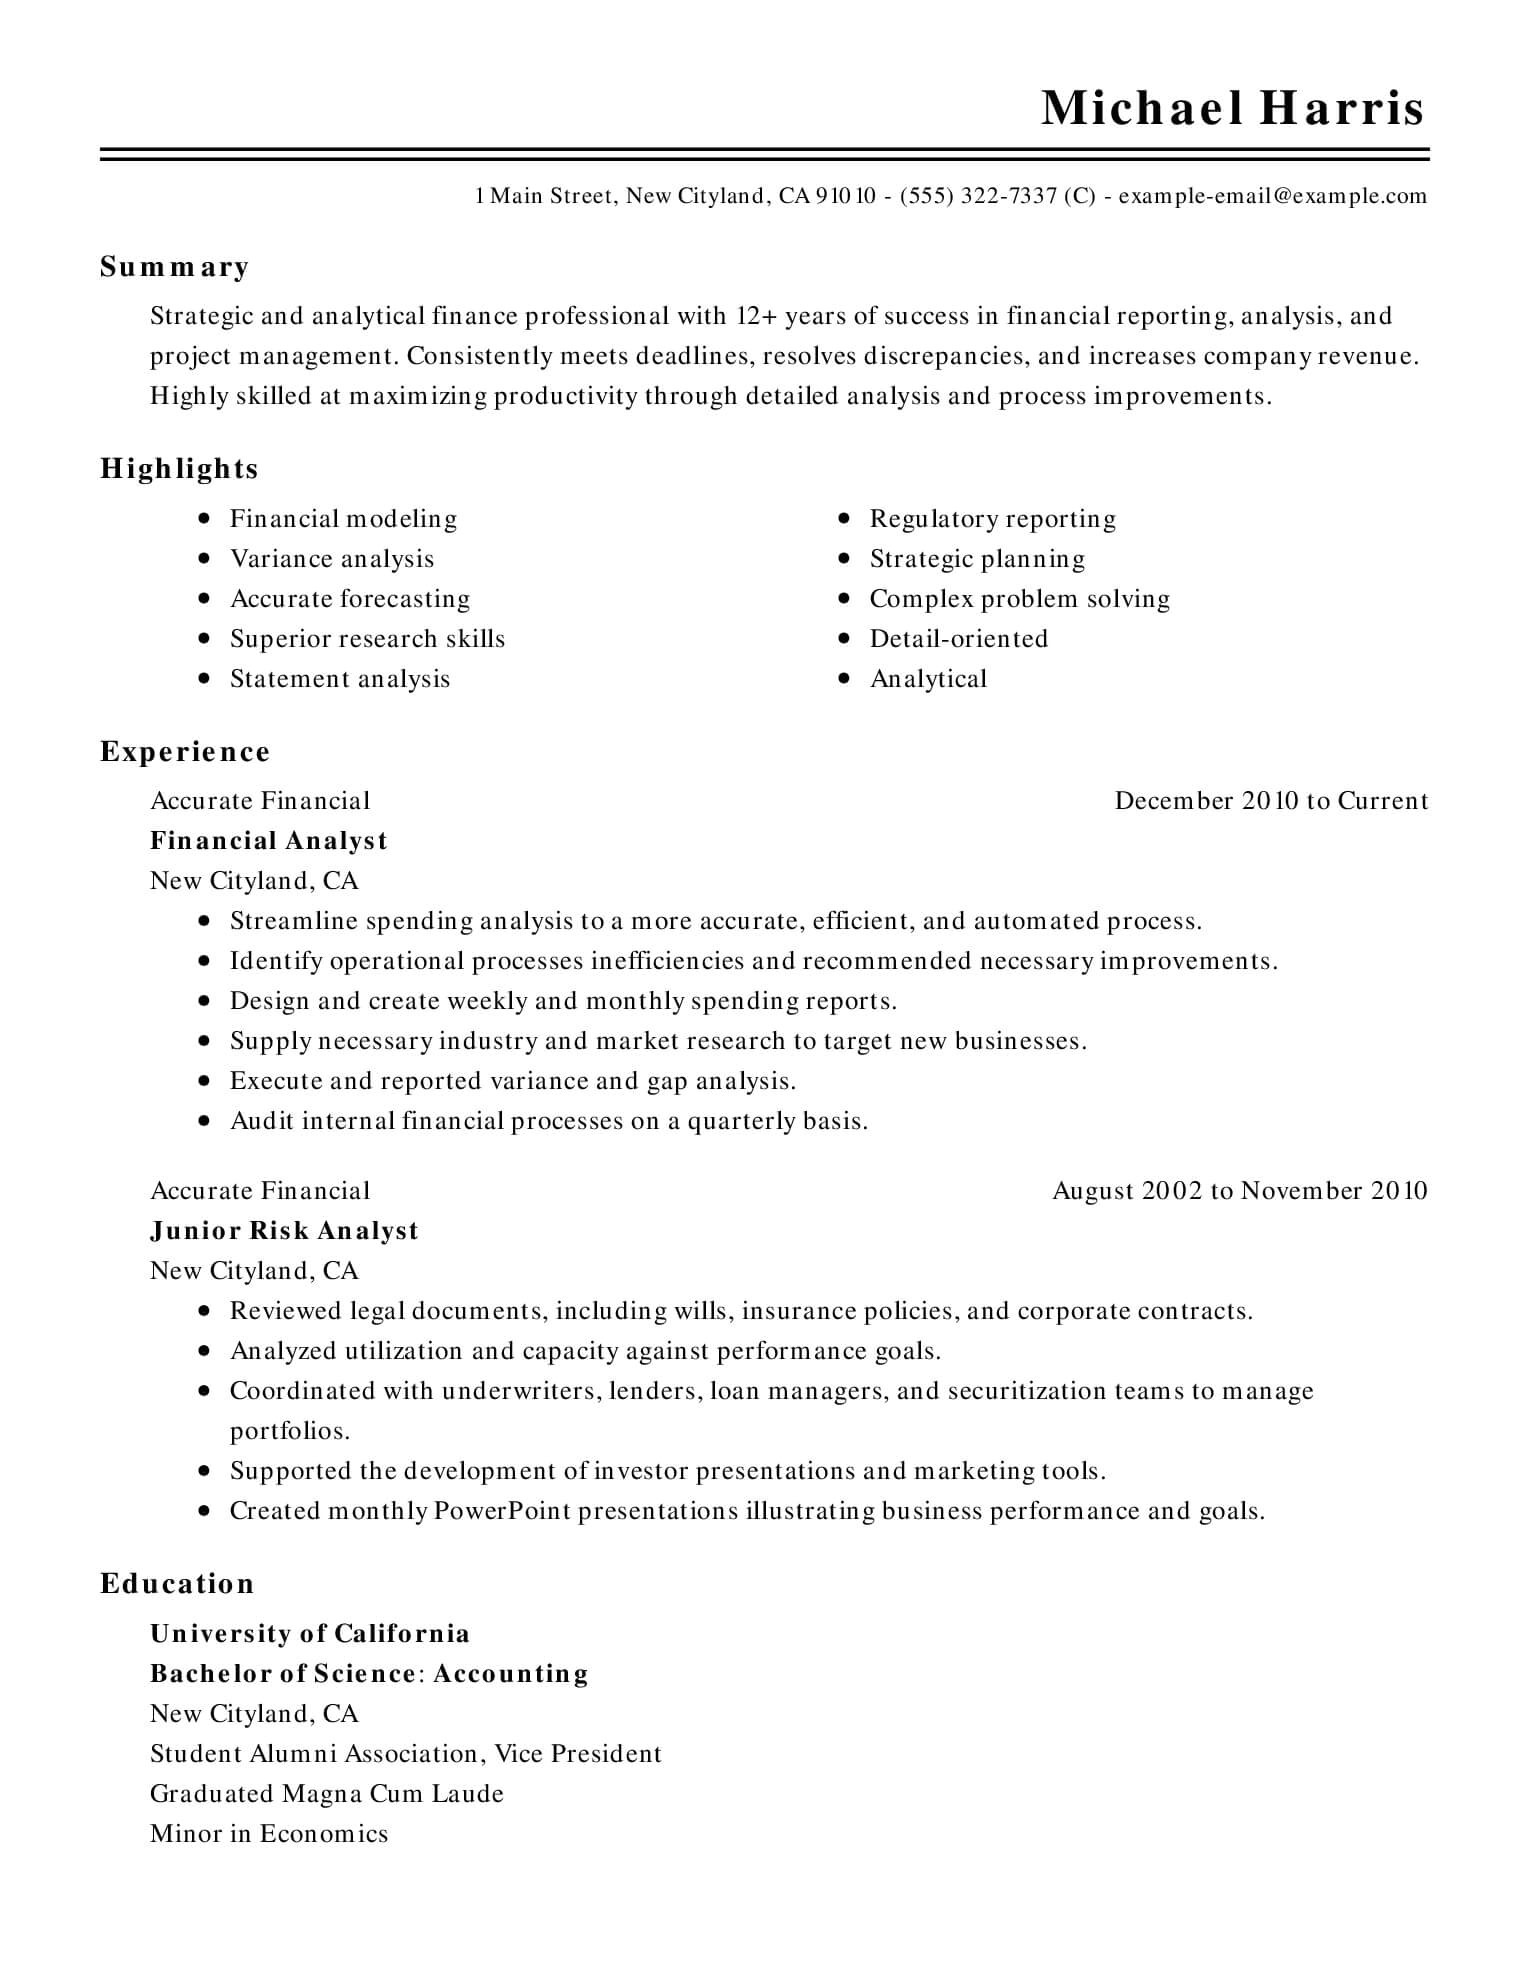 Resume format for Job Microsoft Word 15 Of the Best Resume Templates for Microsoft Word Office